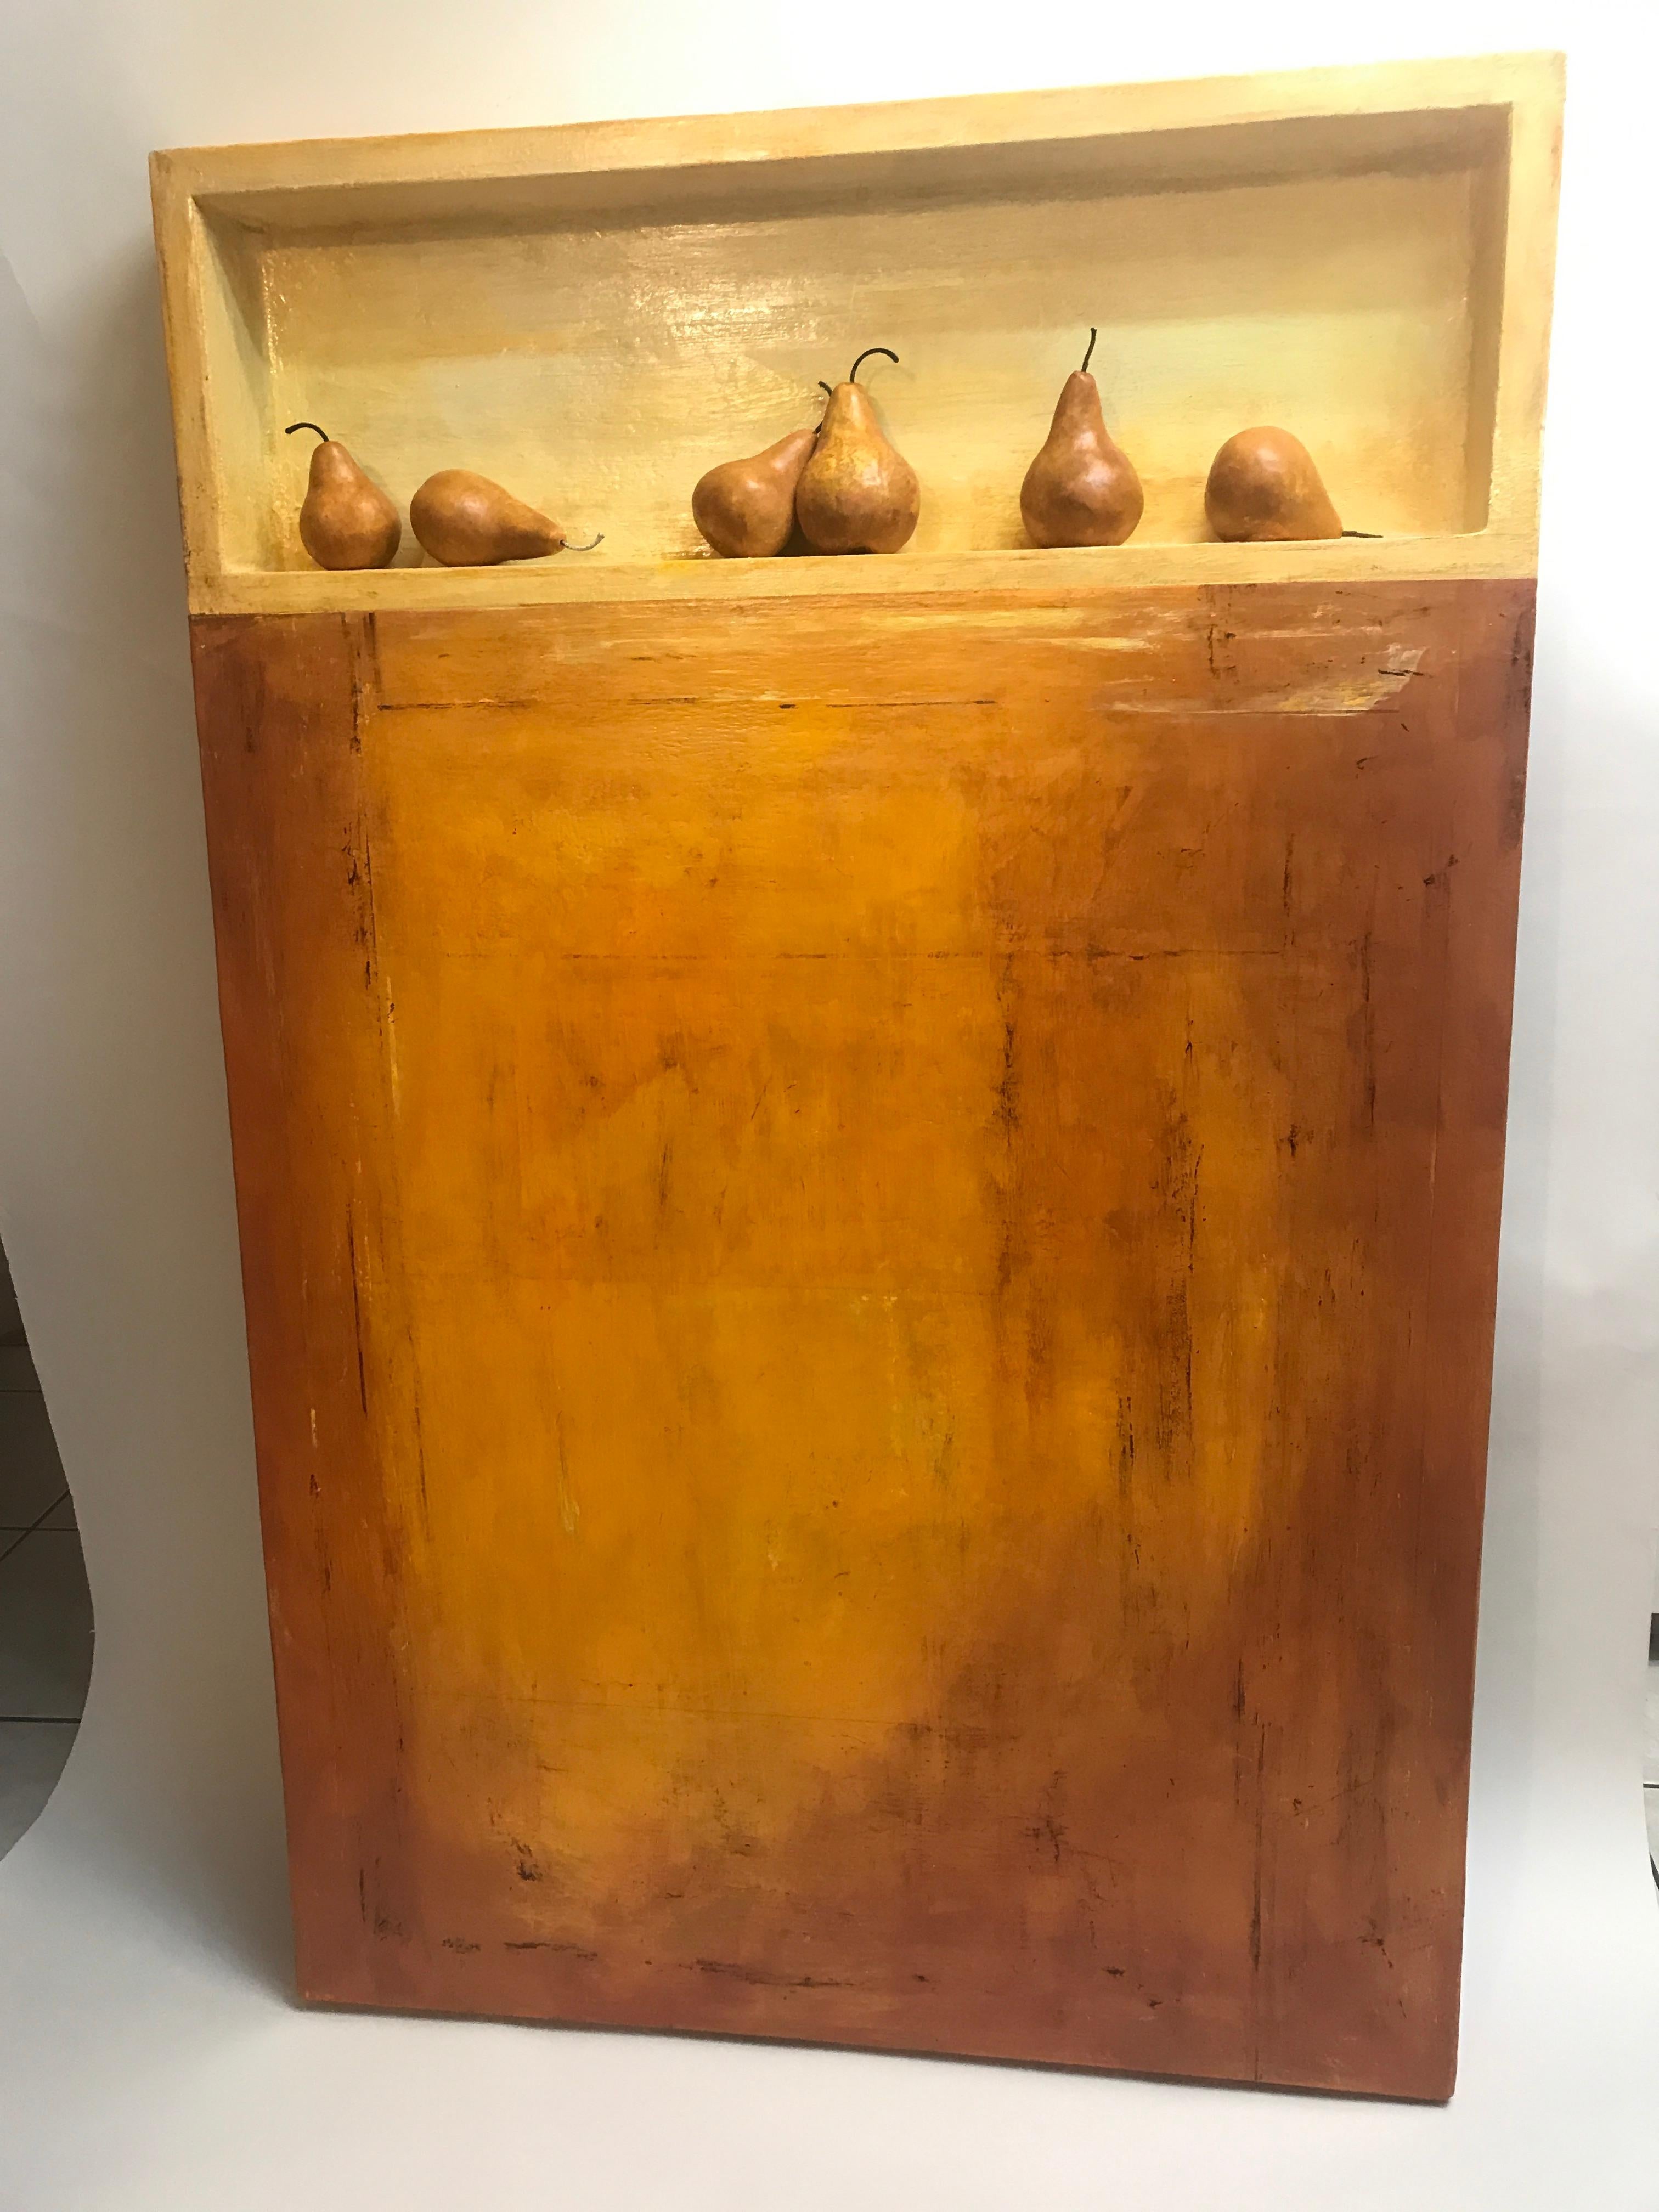  Lemon Sky With Pears 3D Art
Acrylic, marble powder on wood panel with internal shelf displaying 6 cast pears. (Photos with light and without)

Erikson's often introduces artifacts and objects to be placed on a shelve/window set into the painting as